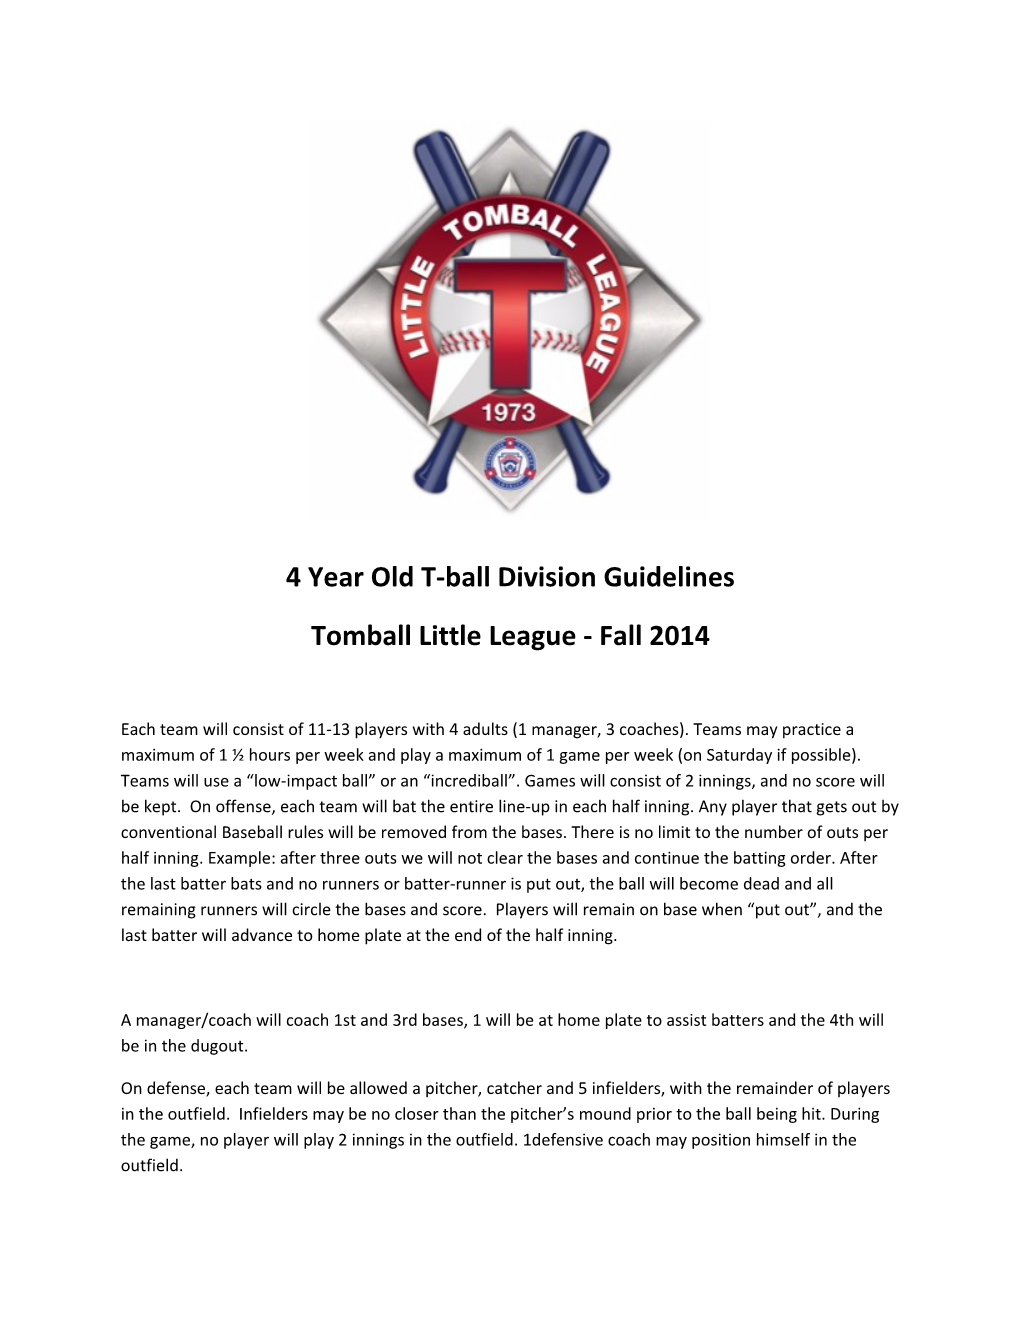 4 Year Old T-Ball Division Guidelines